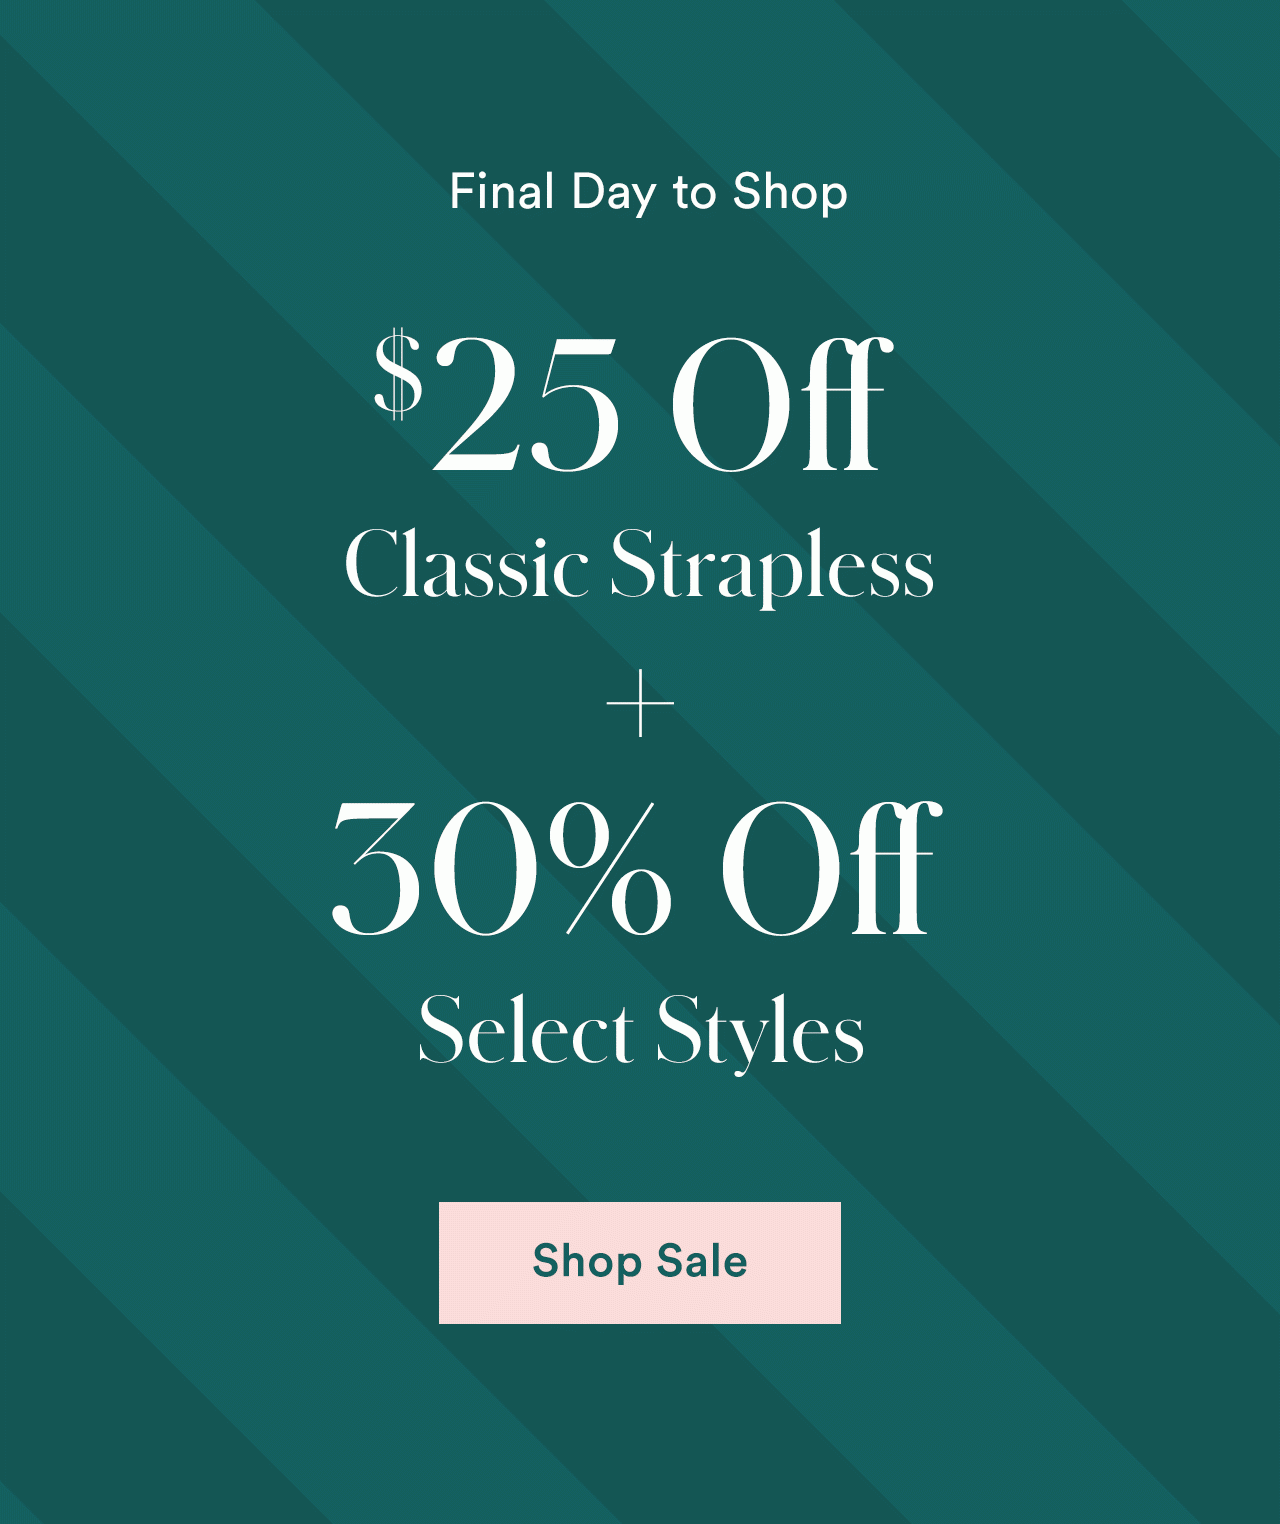 Final Day to Shop | $25 Off Classic Strapless + 30% Off Select Styles | Shop Sale